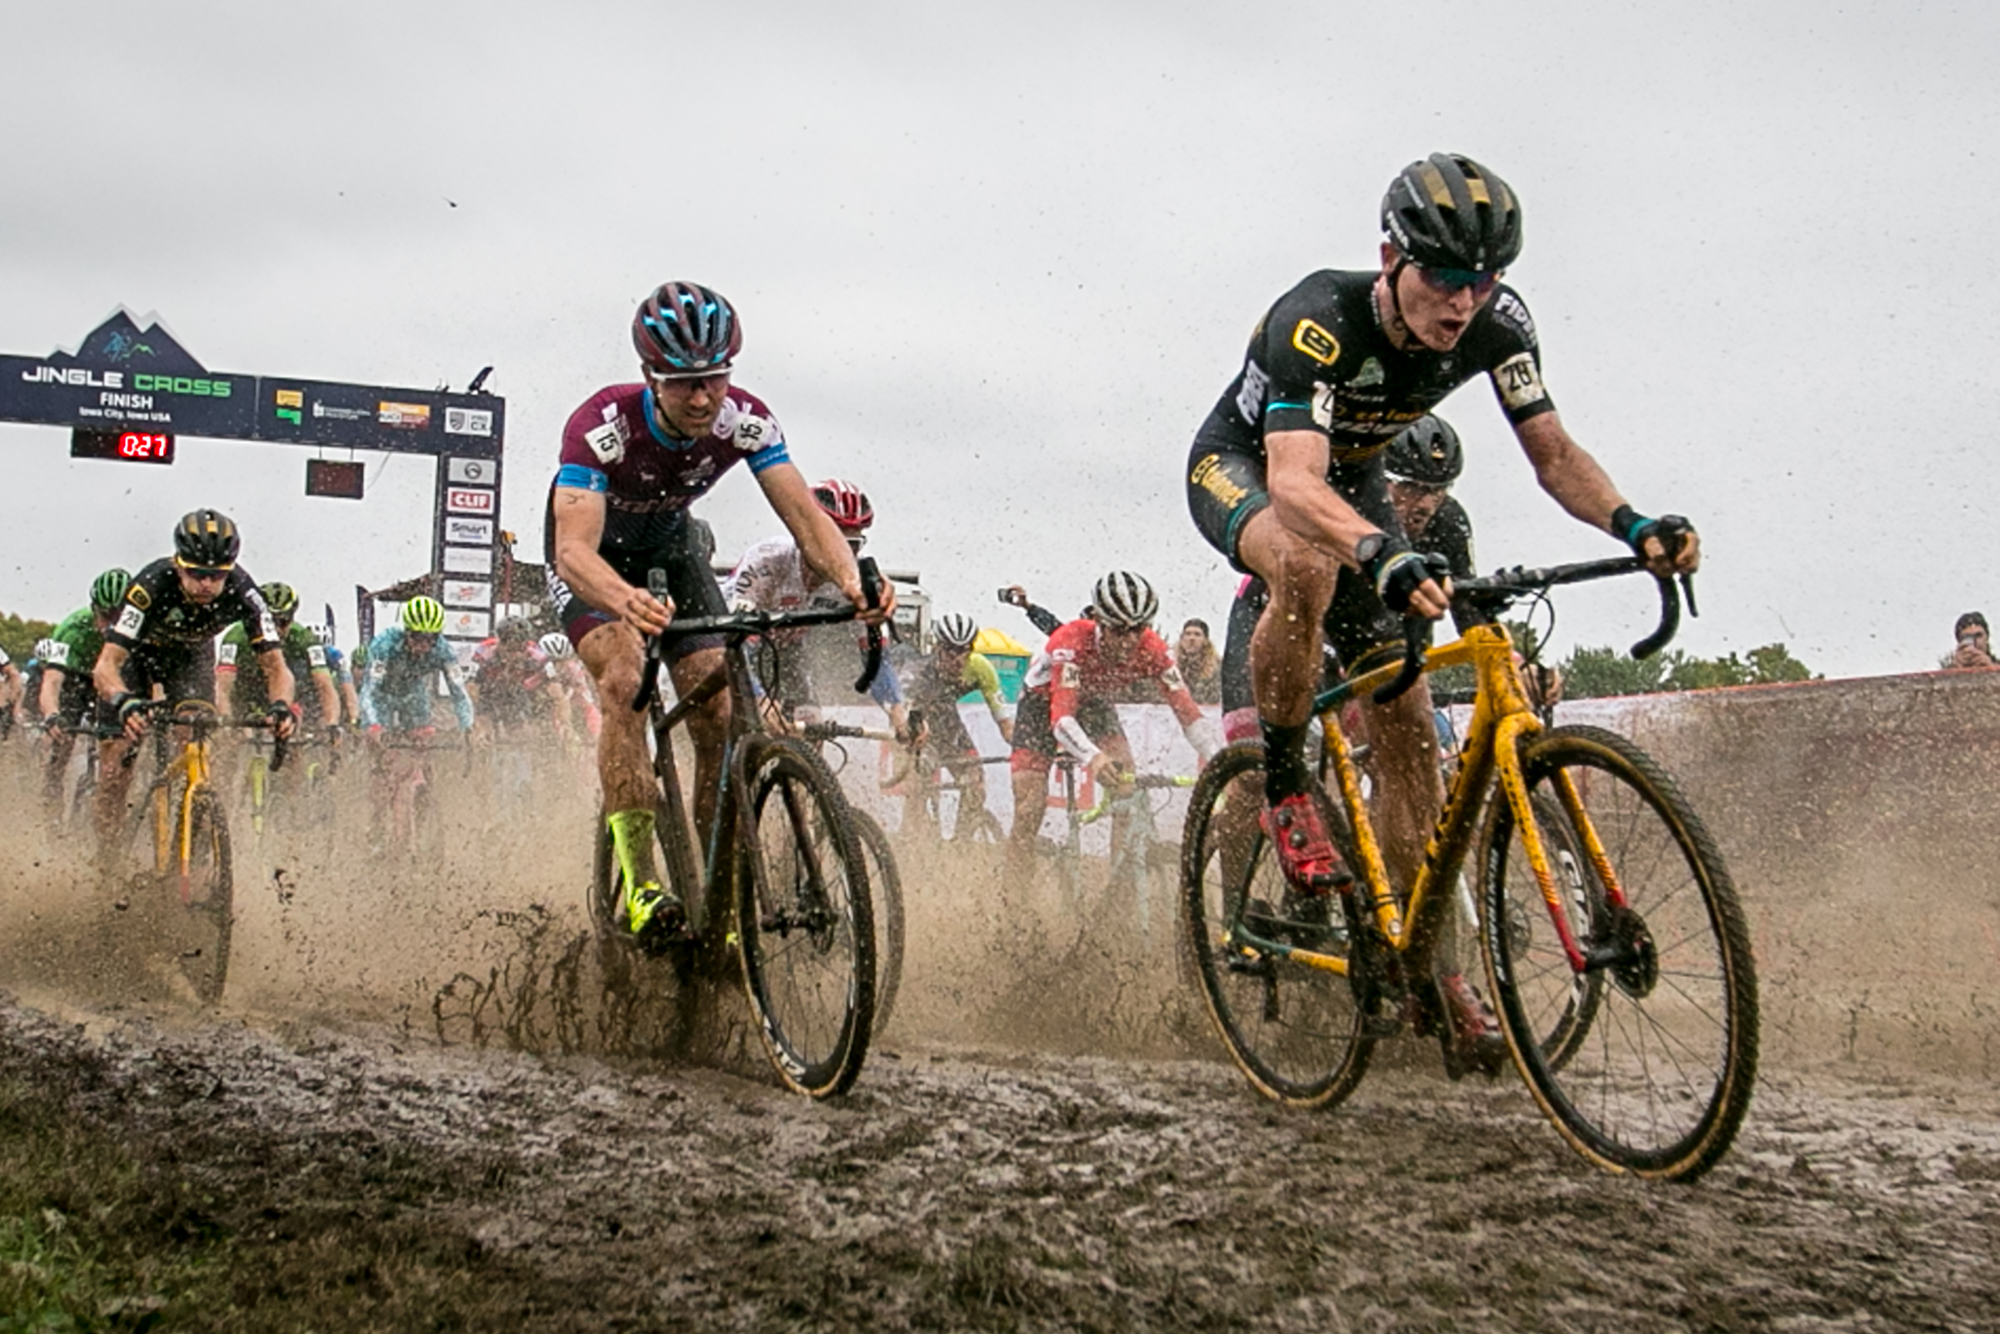 USCX Cyclocross Series to be Broadcast in Europe